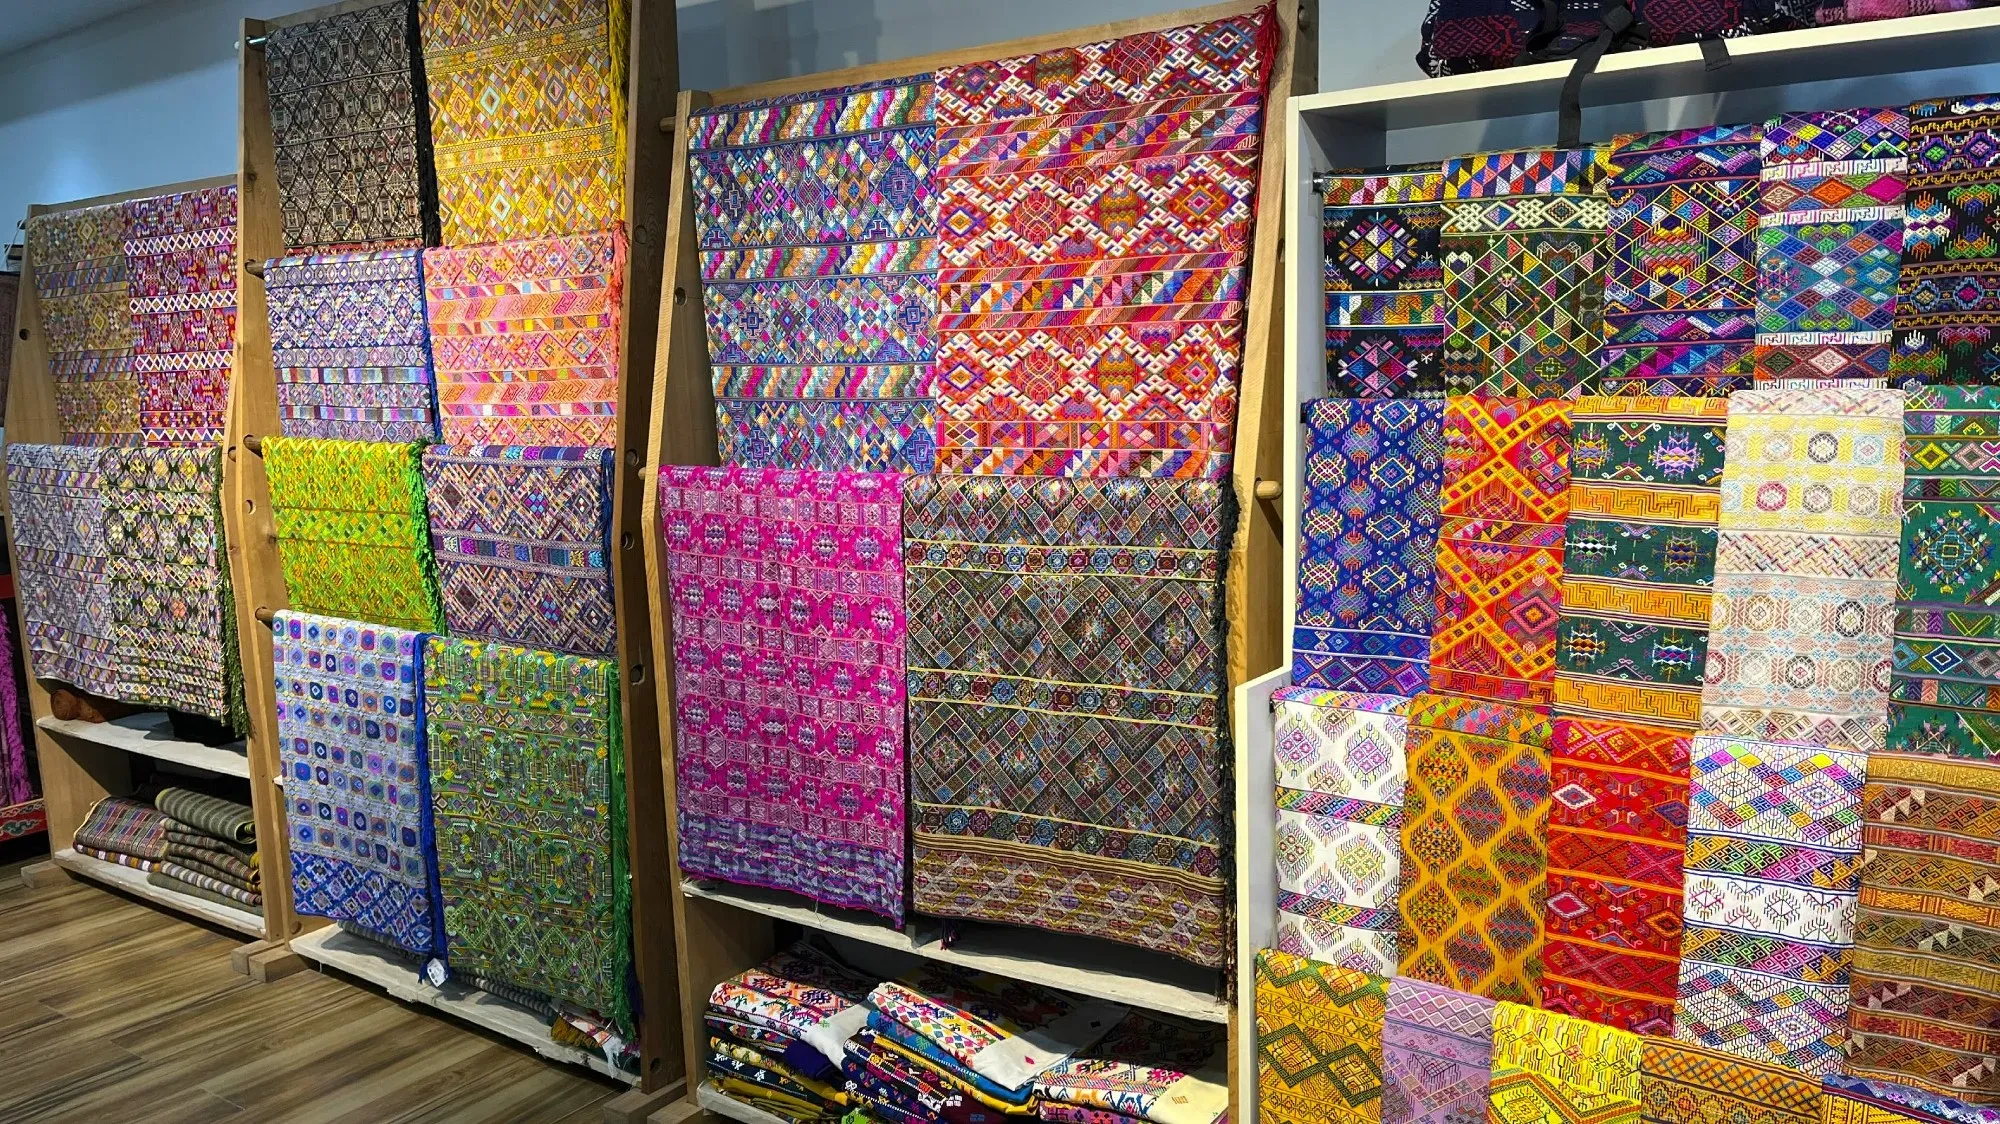 Display of handwoven panels of fabric